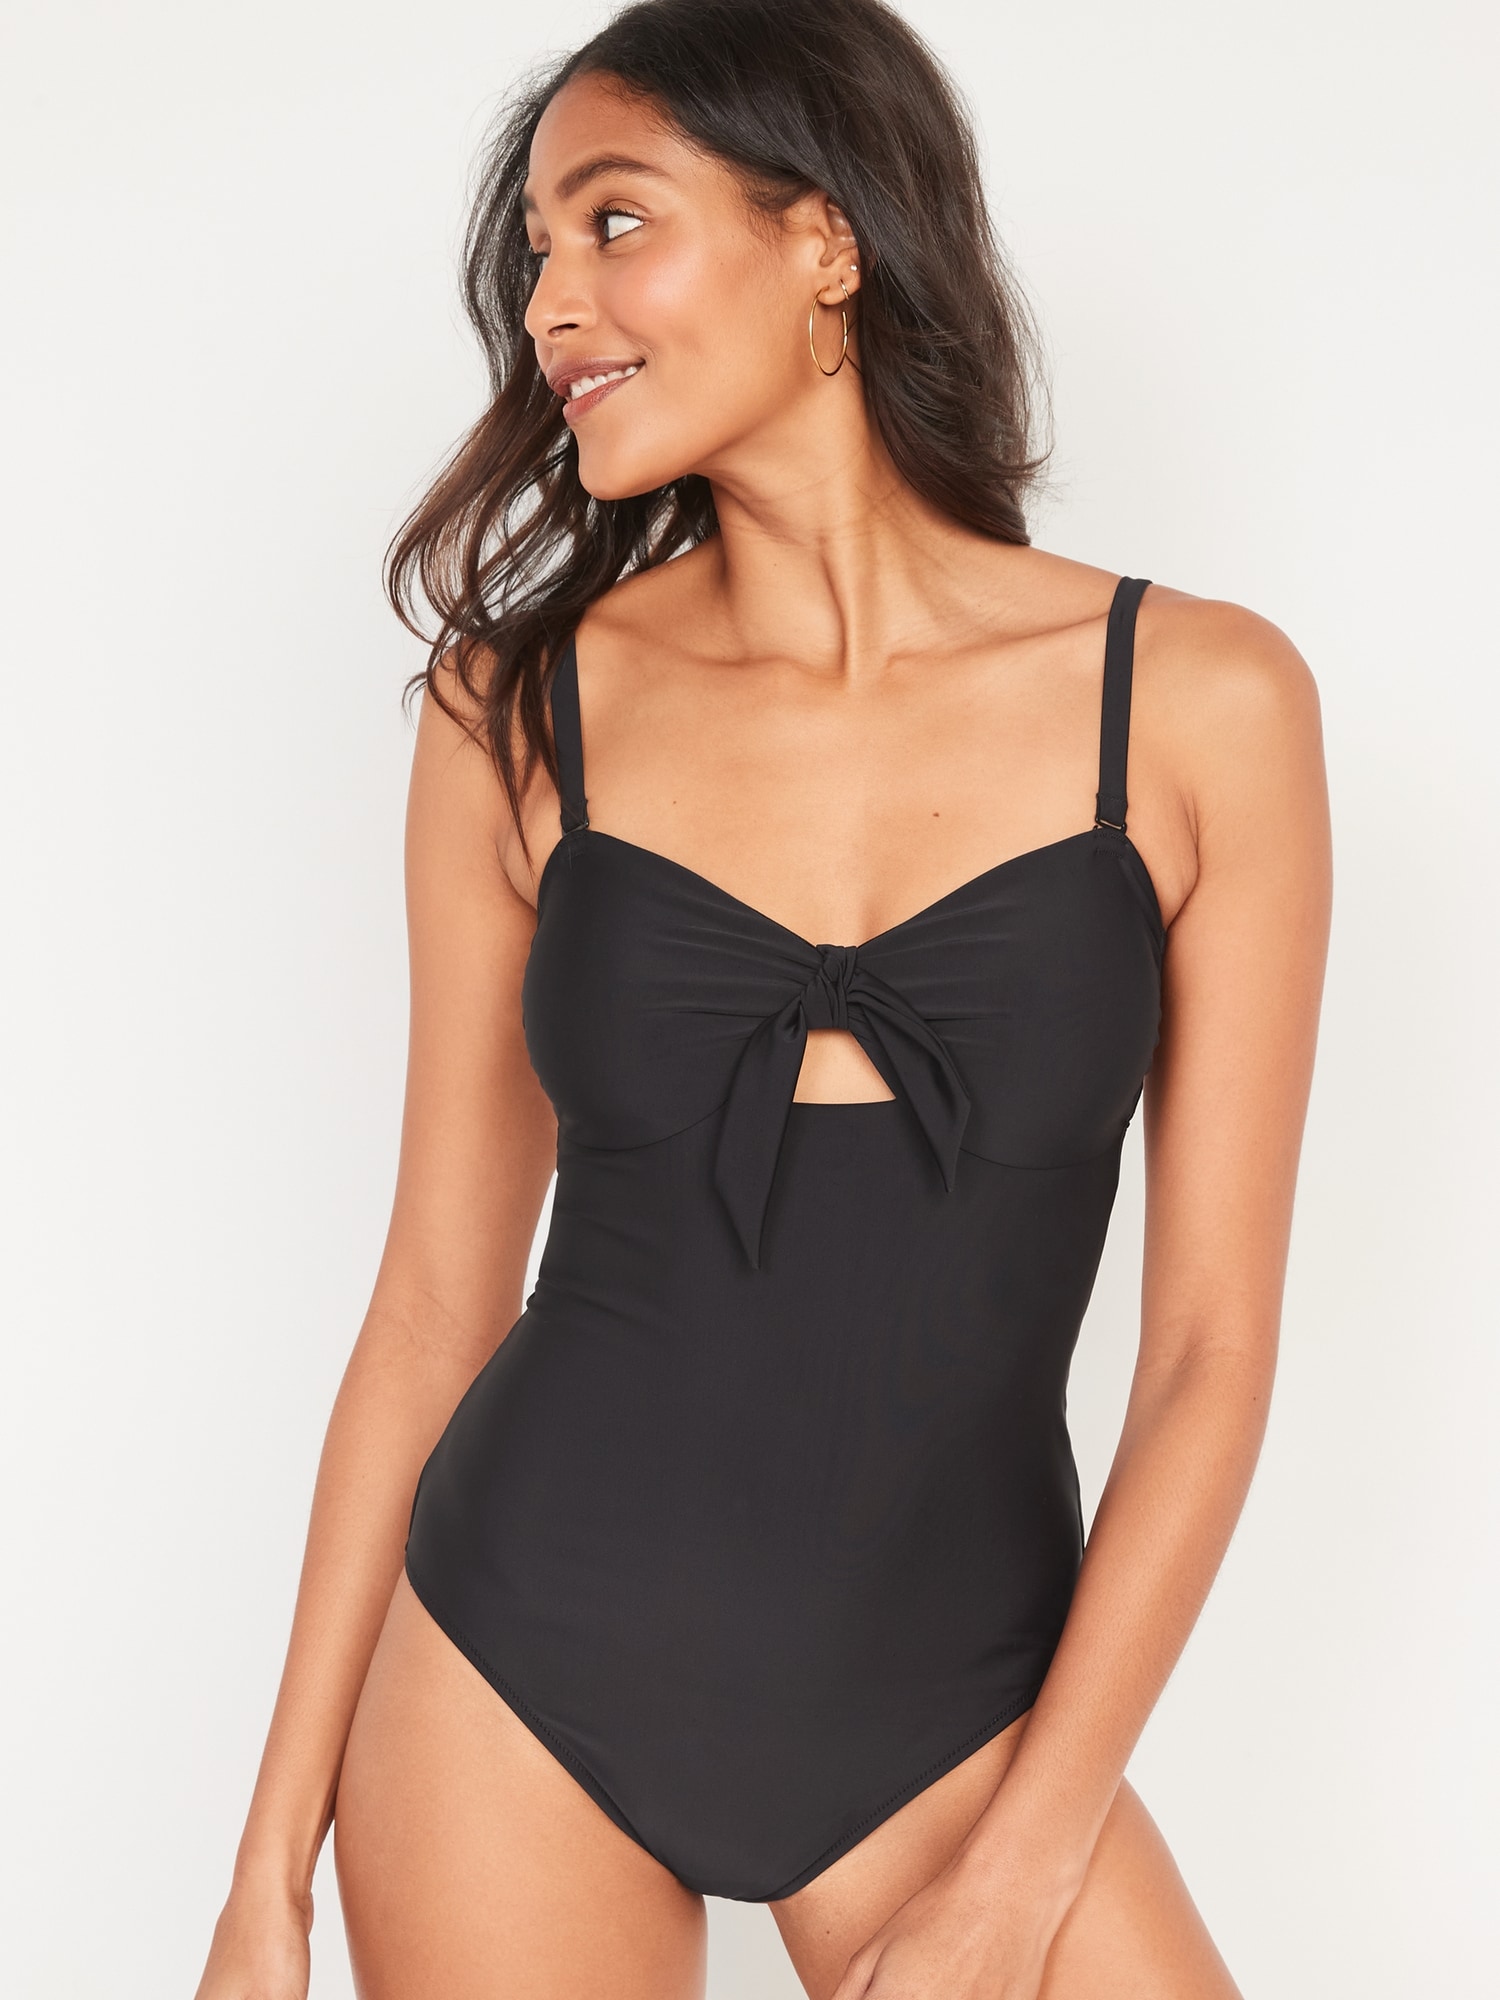 Old Navy Tie-Front Keyhole Bandeau-Style One-Piece Swimsuit for Women black. 1